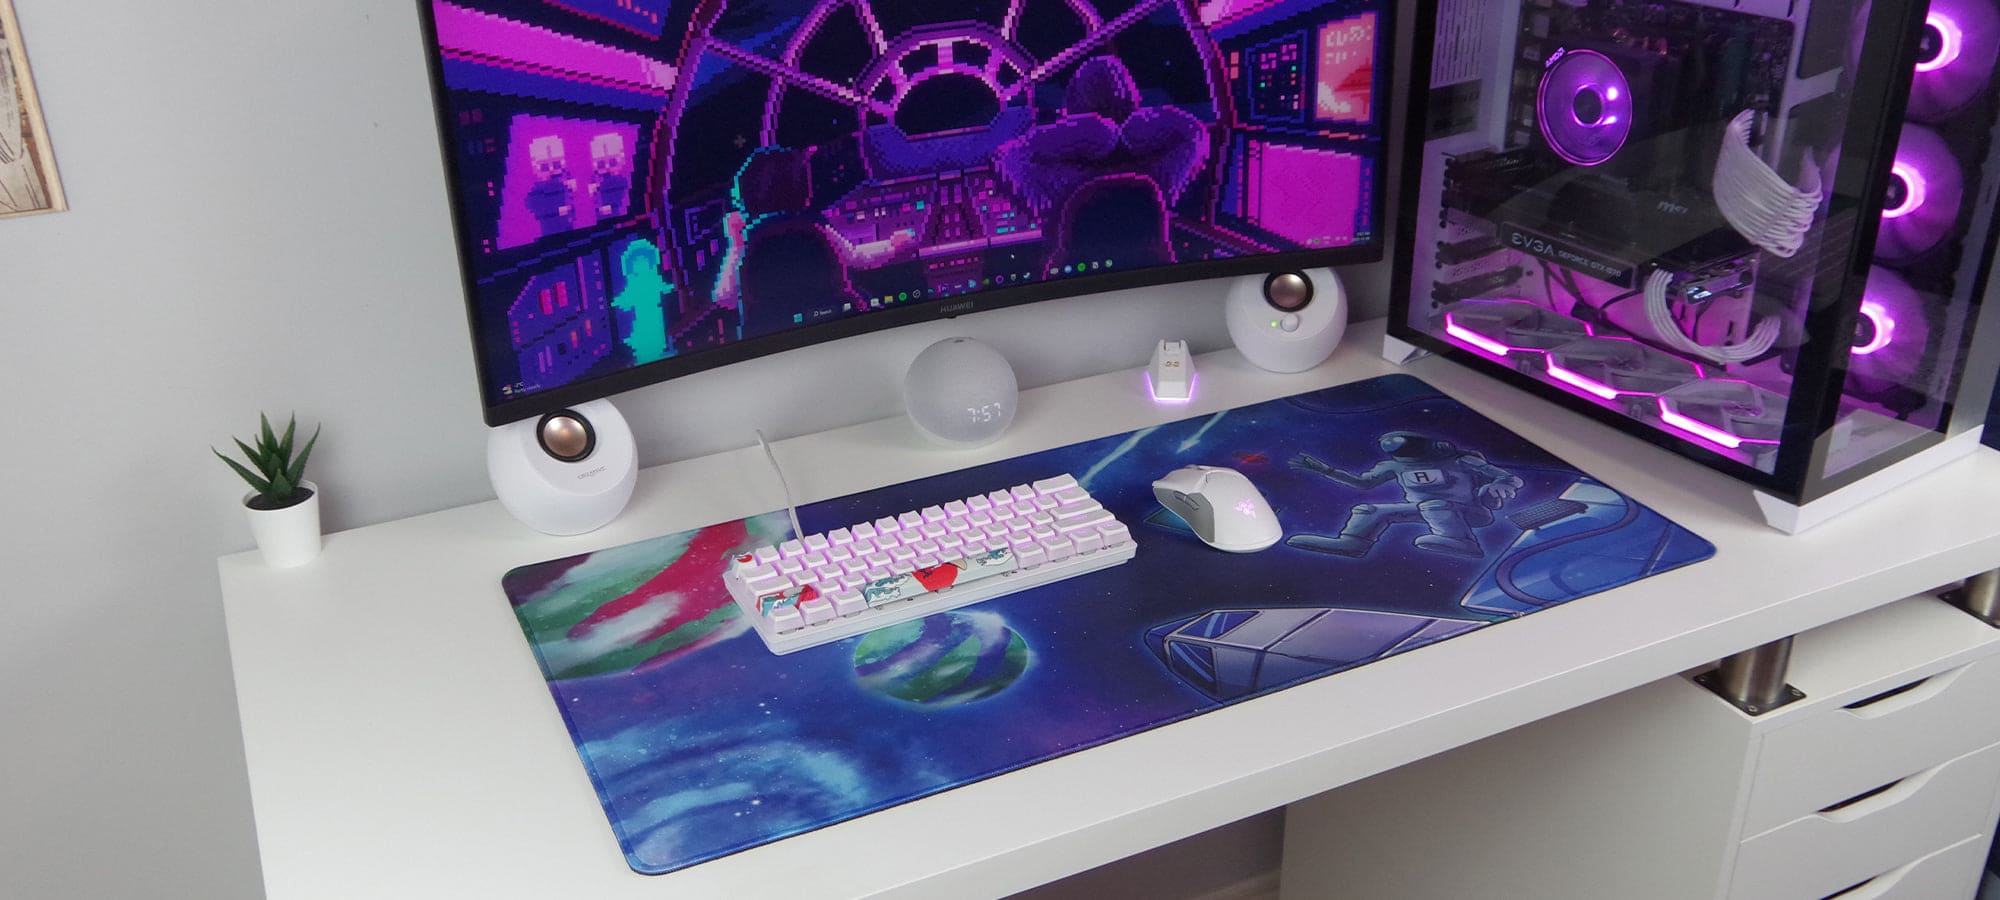 Space and astronaut with keyboard and mouse with planets in background deskpad and mousepad on desk 45 degree angle view